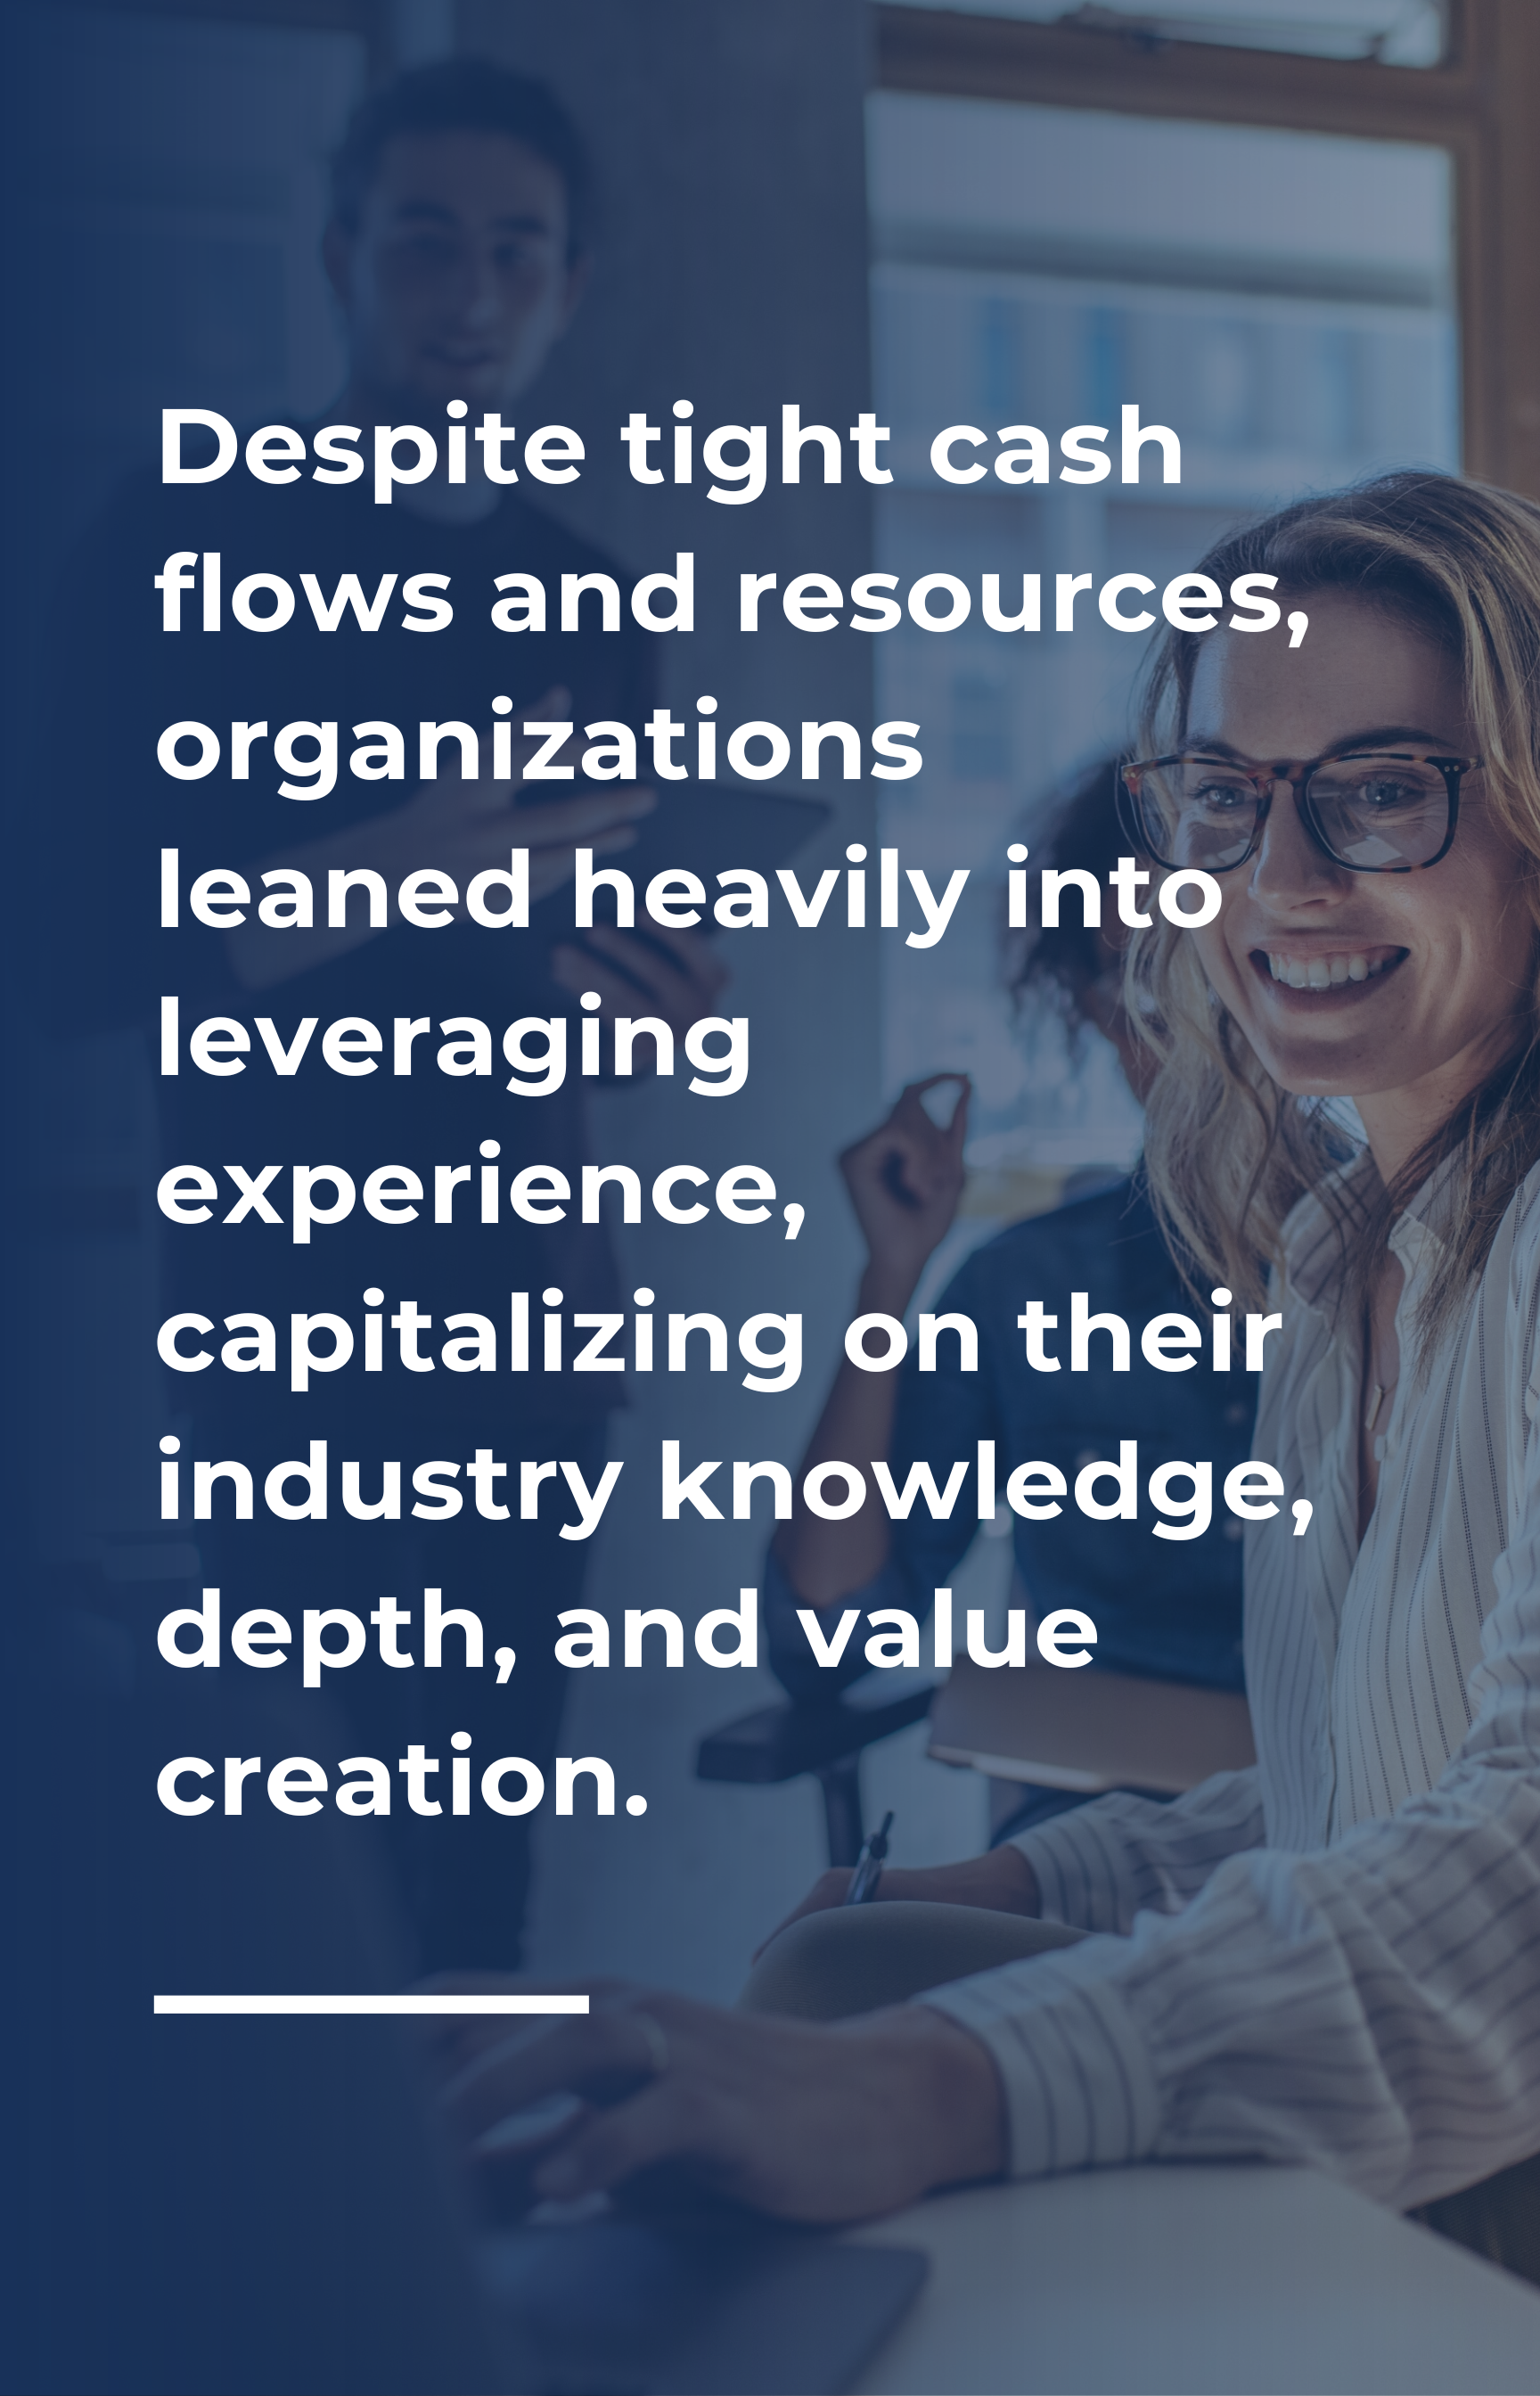 Despite tight cash flows and resources, organizations leaned heavily into leveraging experience, capitalizing on their industry knowledge, depth, and value creation.